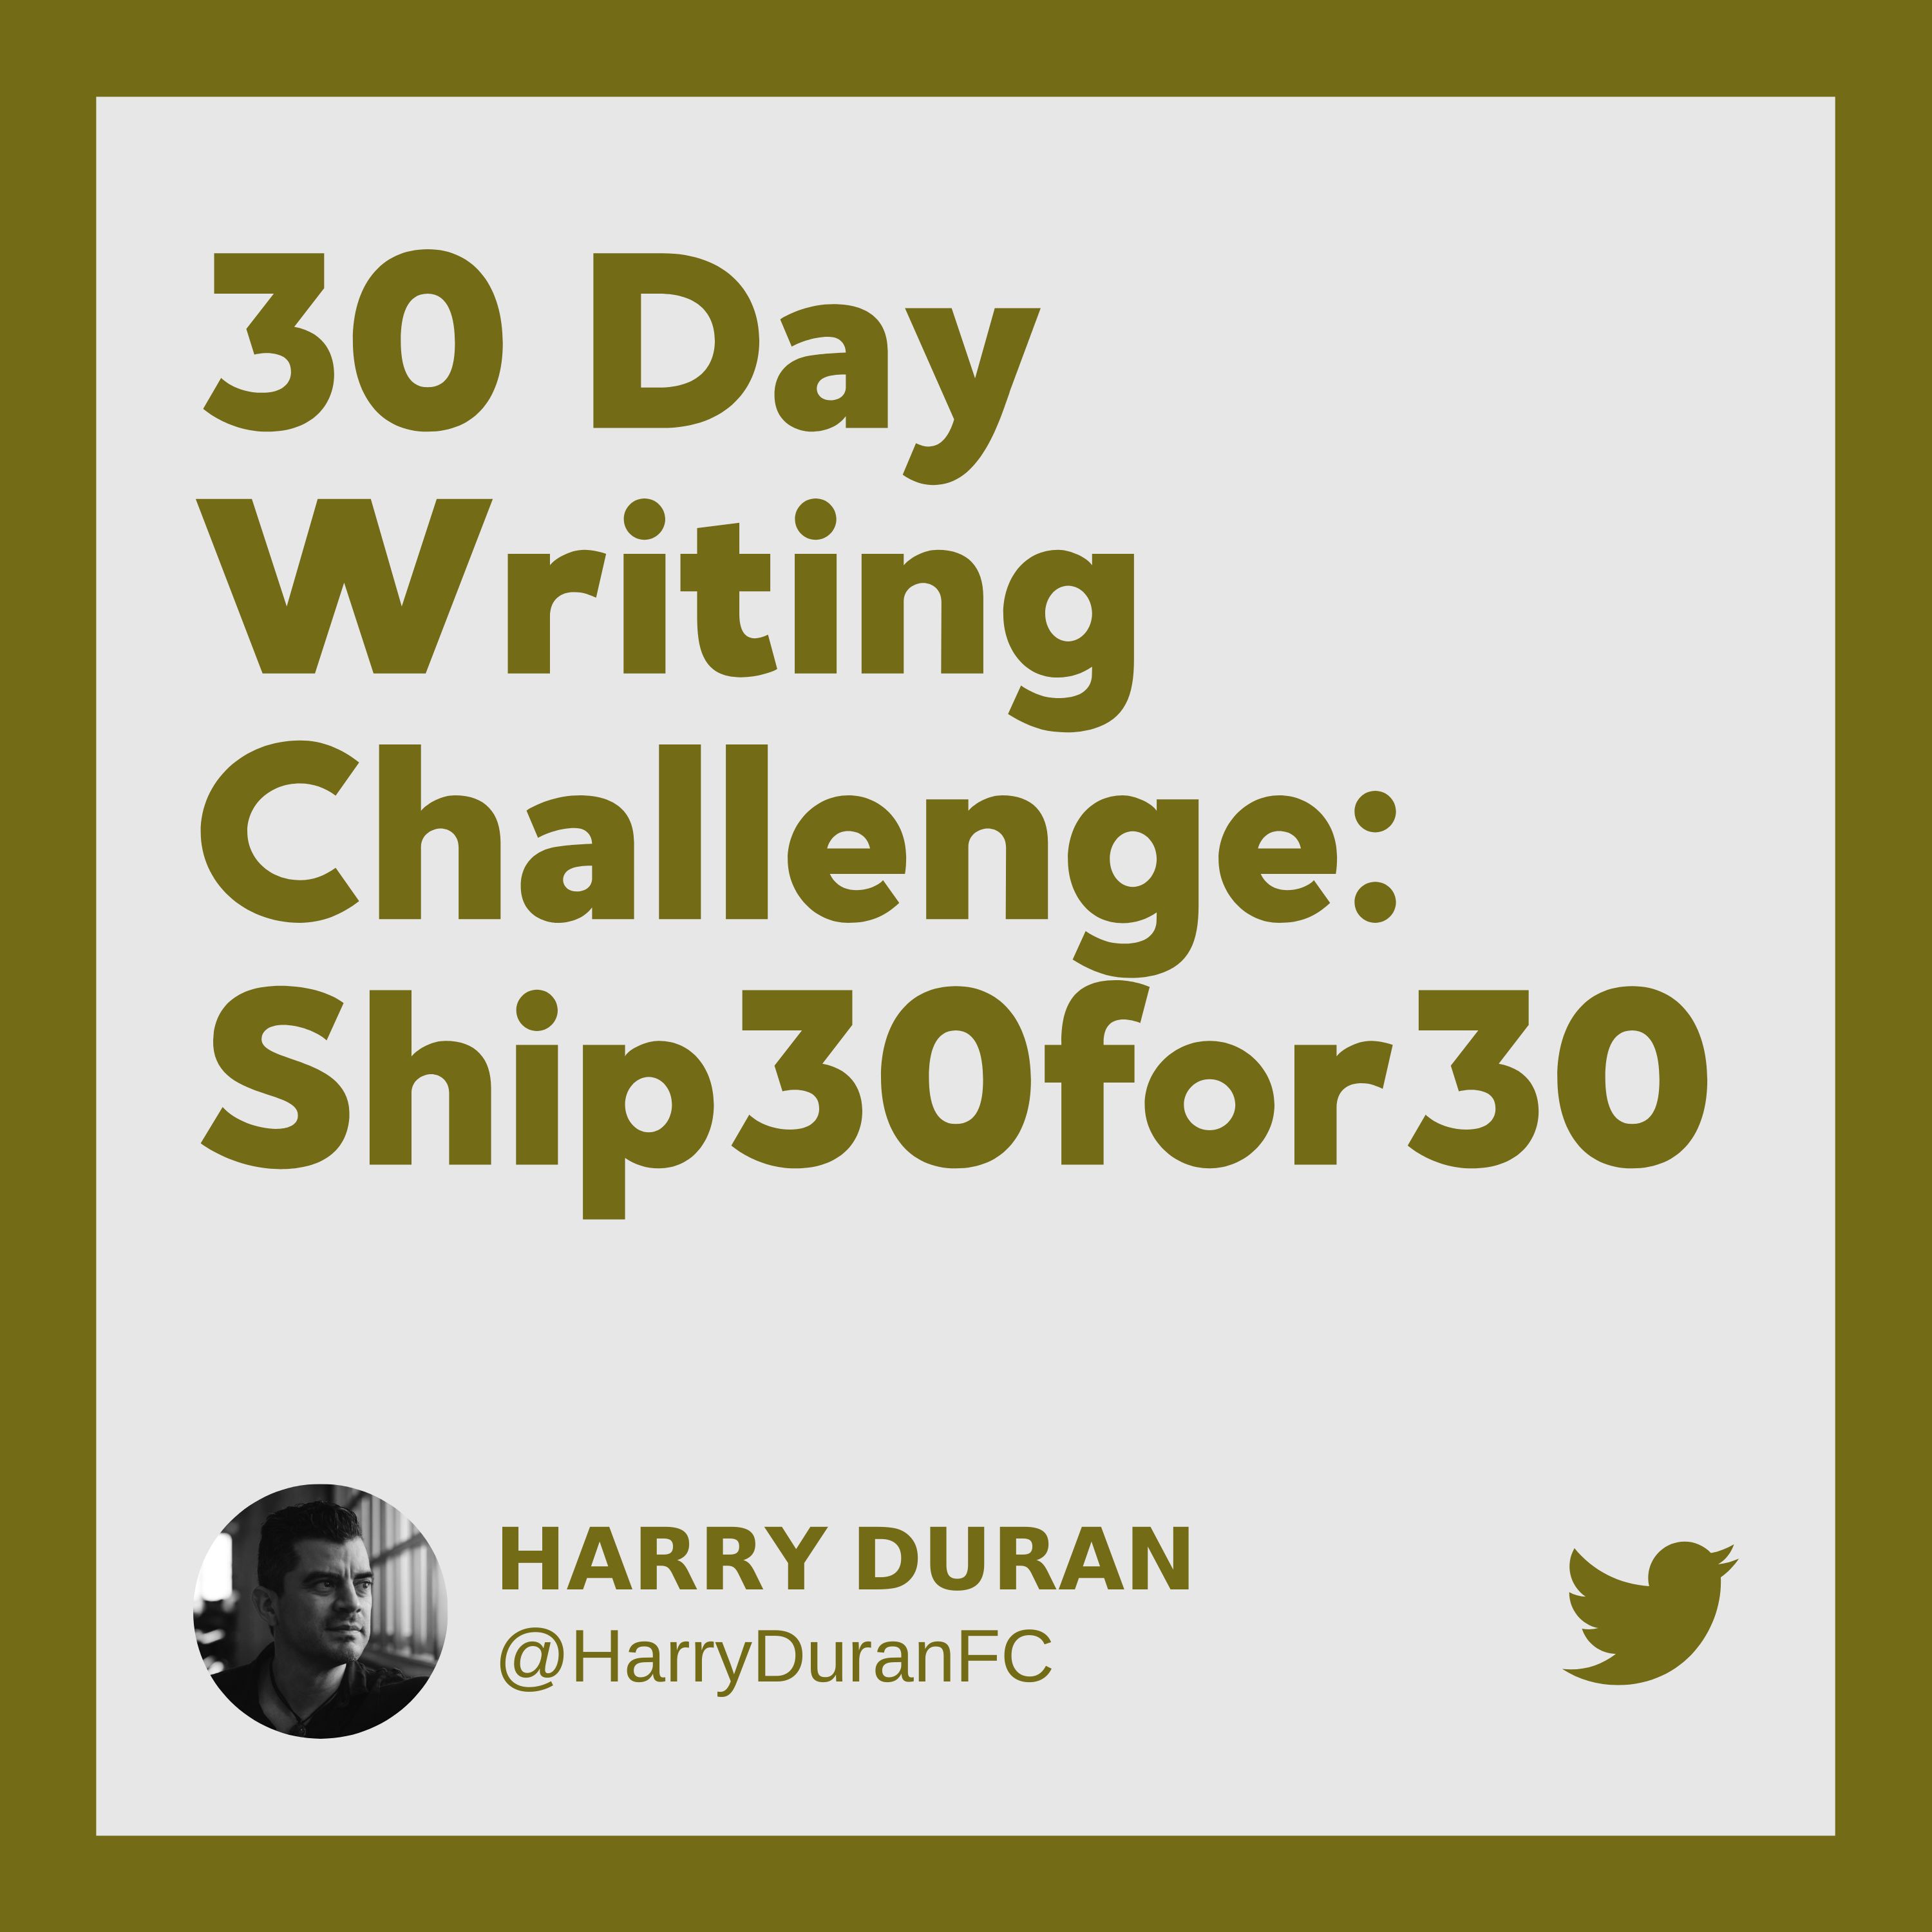 Artwork for 30 Day Writing Challenge - Ship30for30